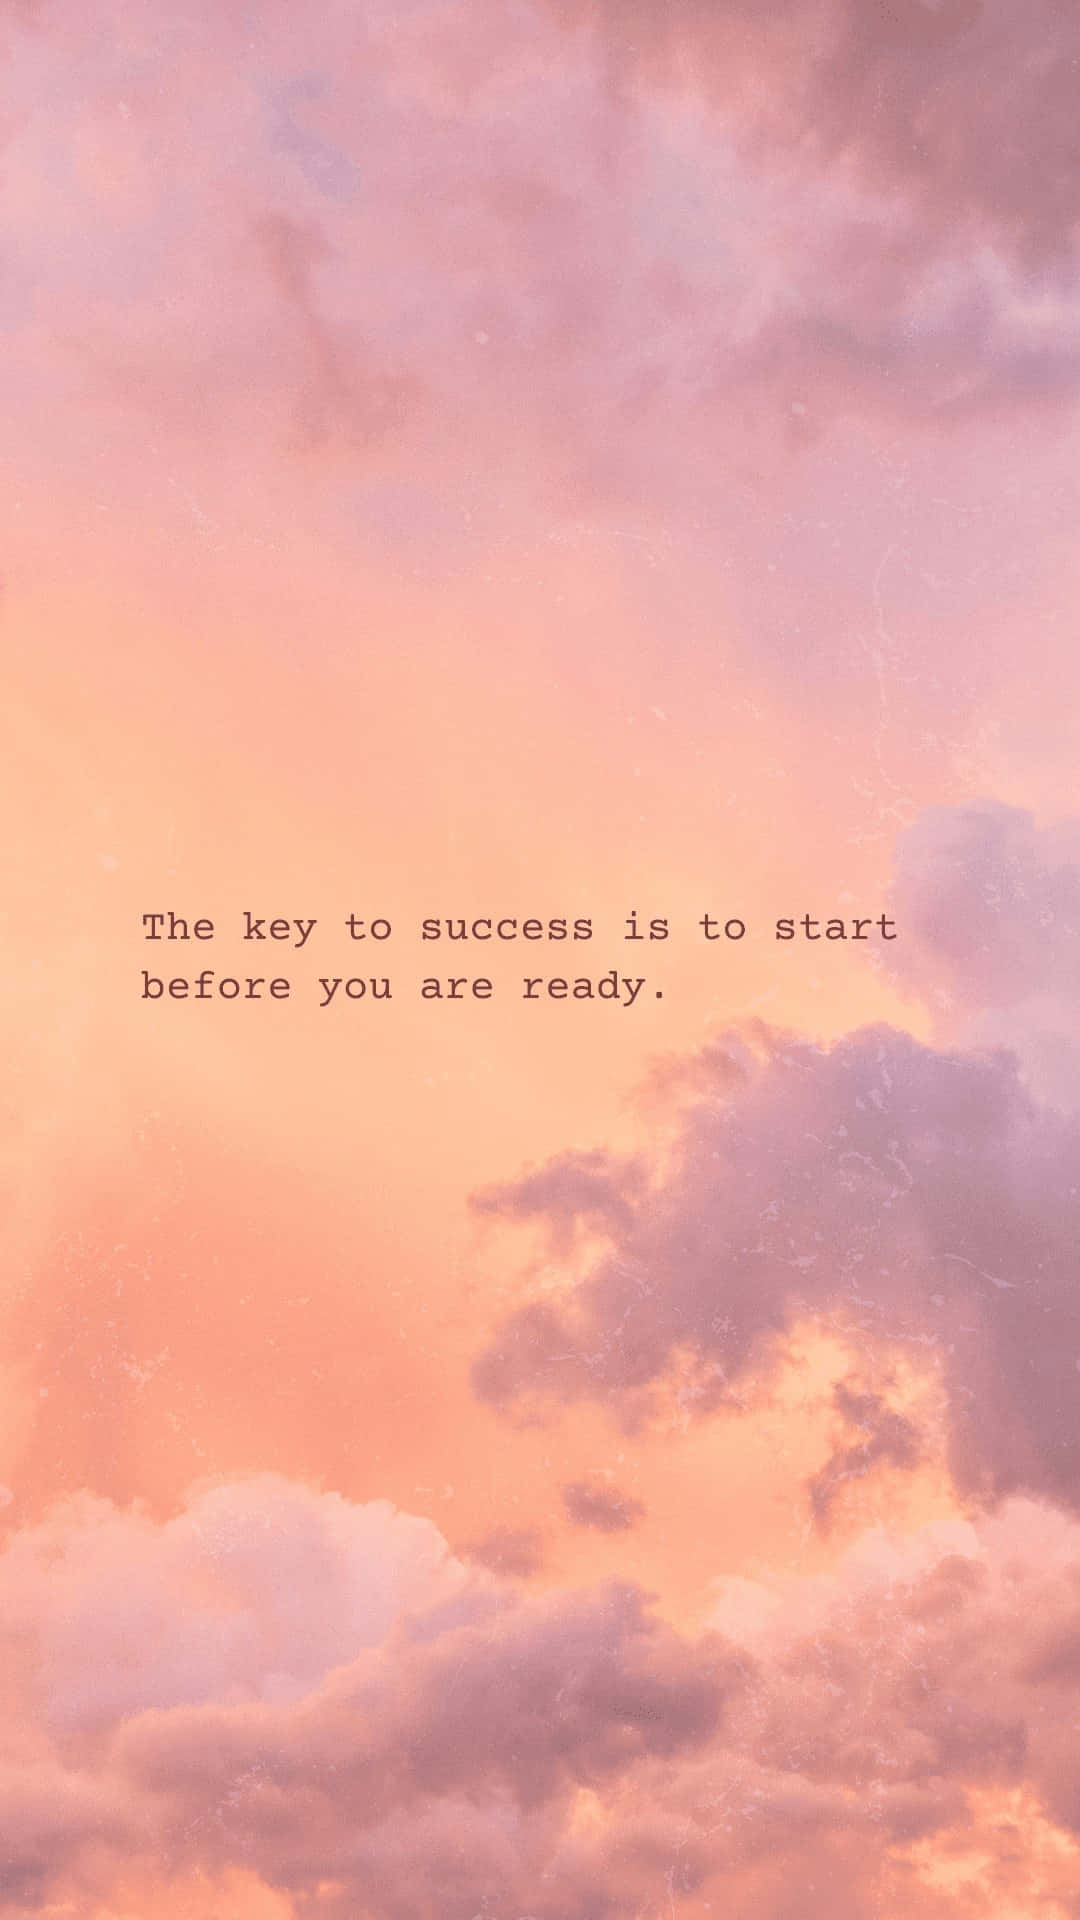 Success Start Before Ready Quote Wallpaper